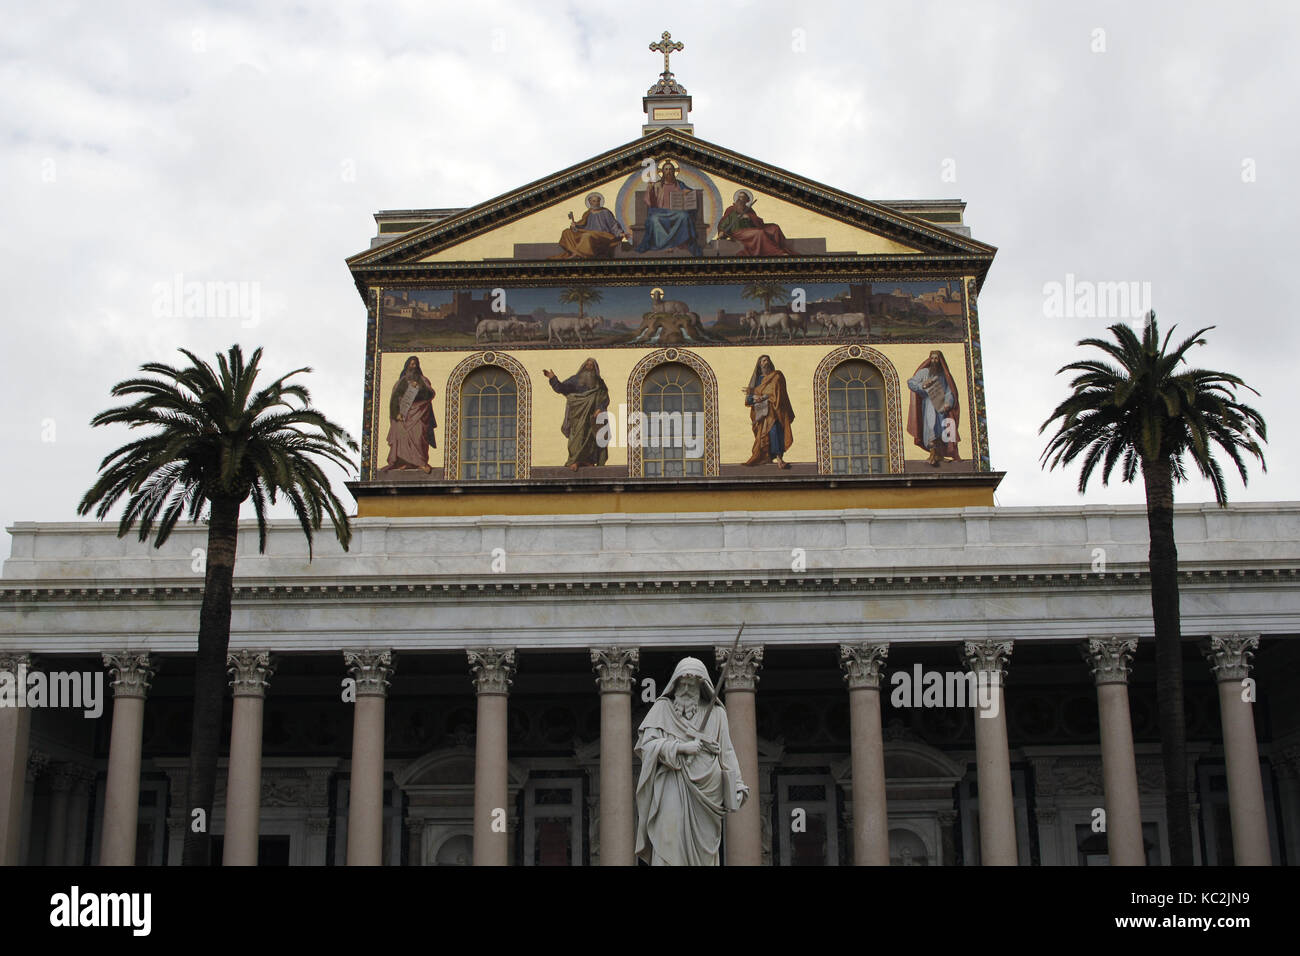 Italy. Rome. Exterior of Basilica of Saint Paul Outside the Walls. Reconstruction of Facade. Neoclassical style. Architect, Luigi Poletti (1792-1869) and St. Paul Statue by Giuseppe Obici. Stock Photo